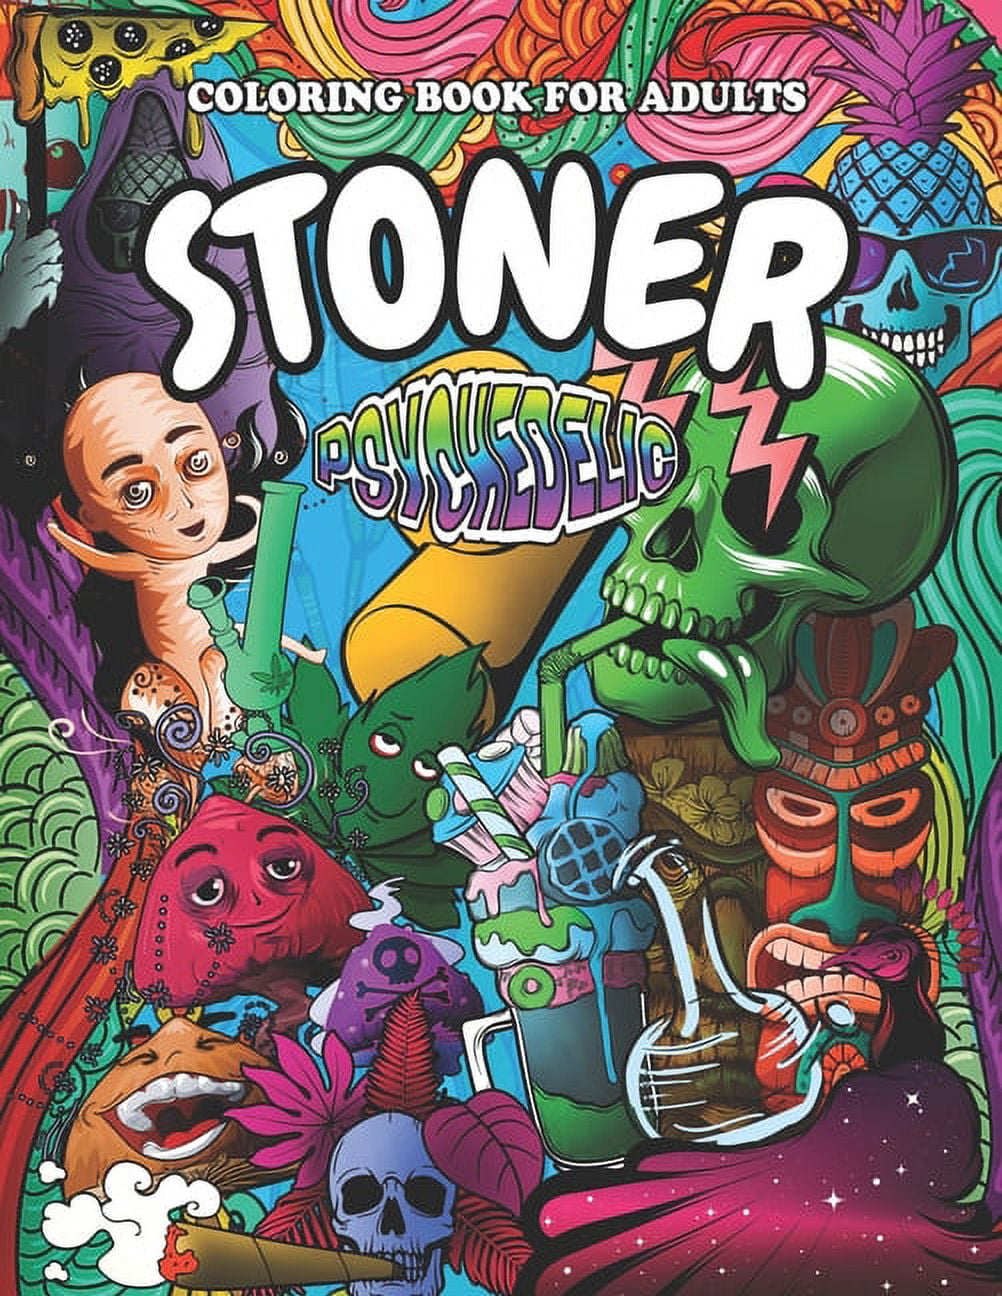 Stoner Coloring Book for Adults: Adult Coloring Book by Domè Betz,  Paperback